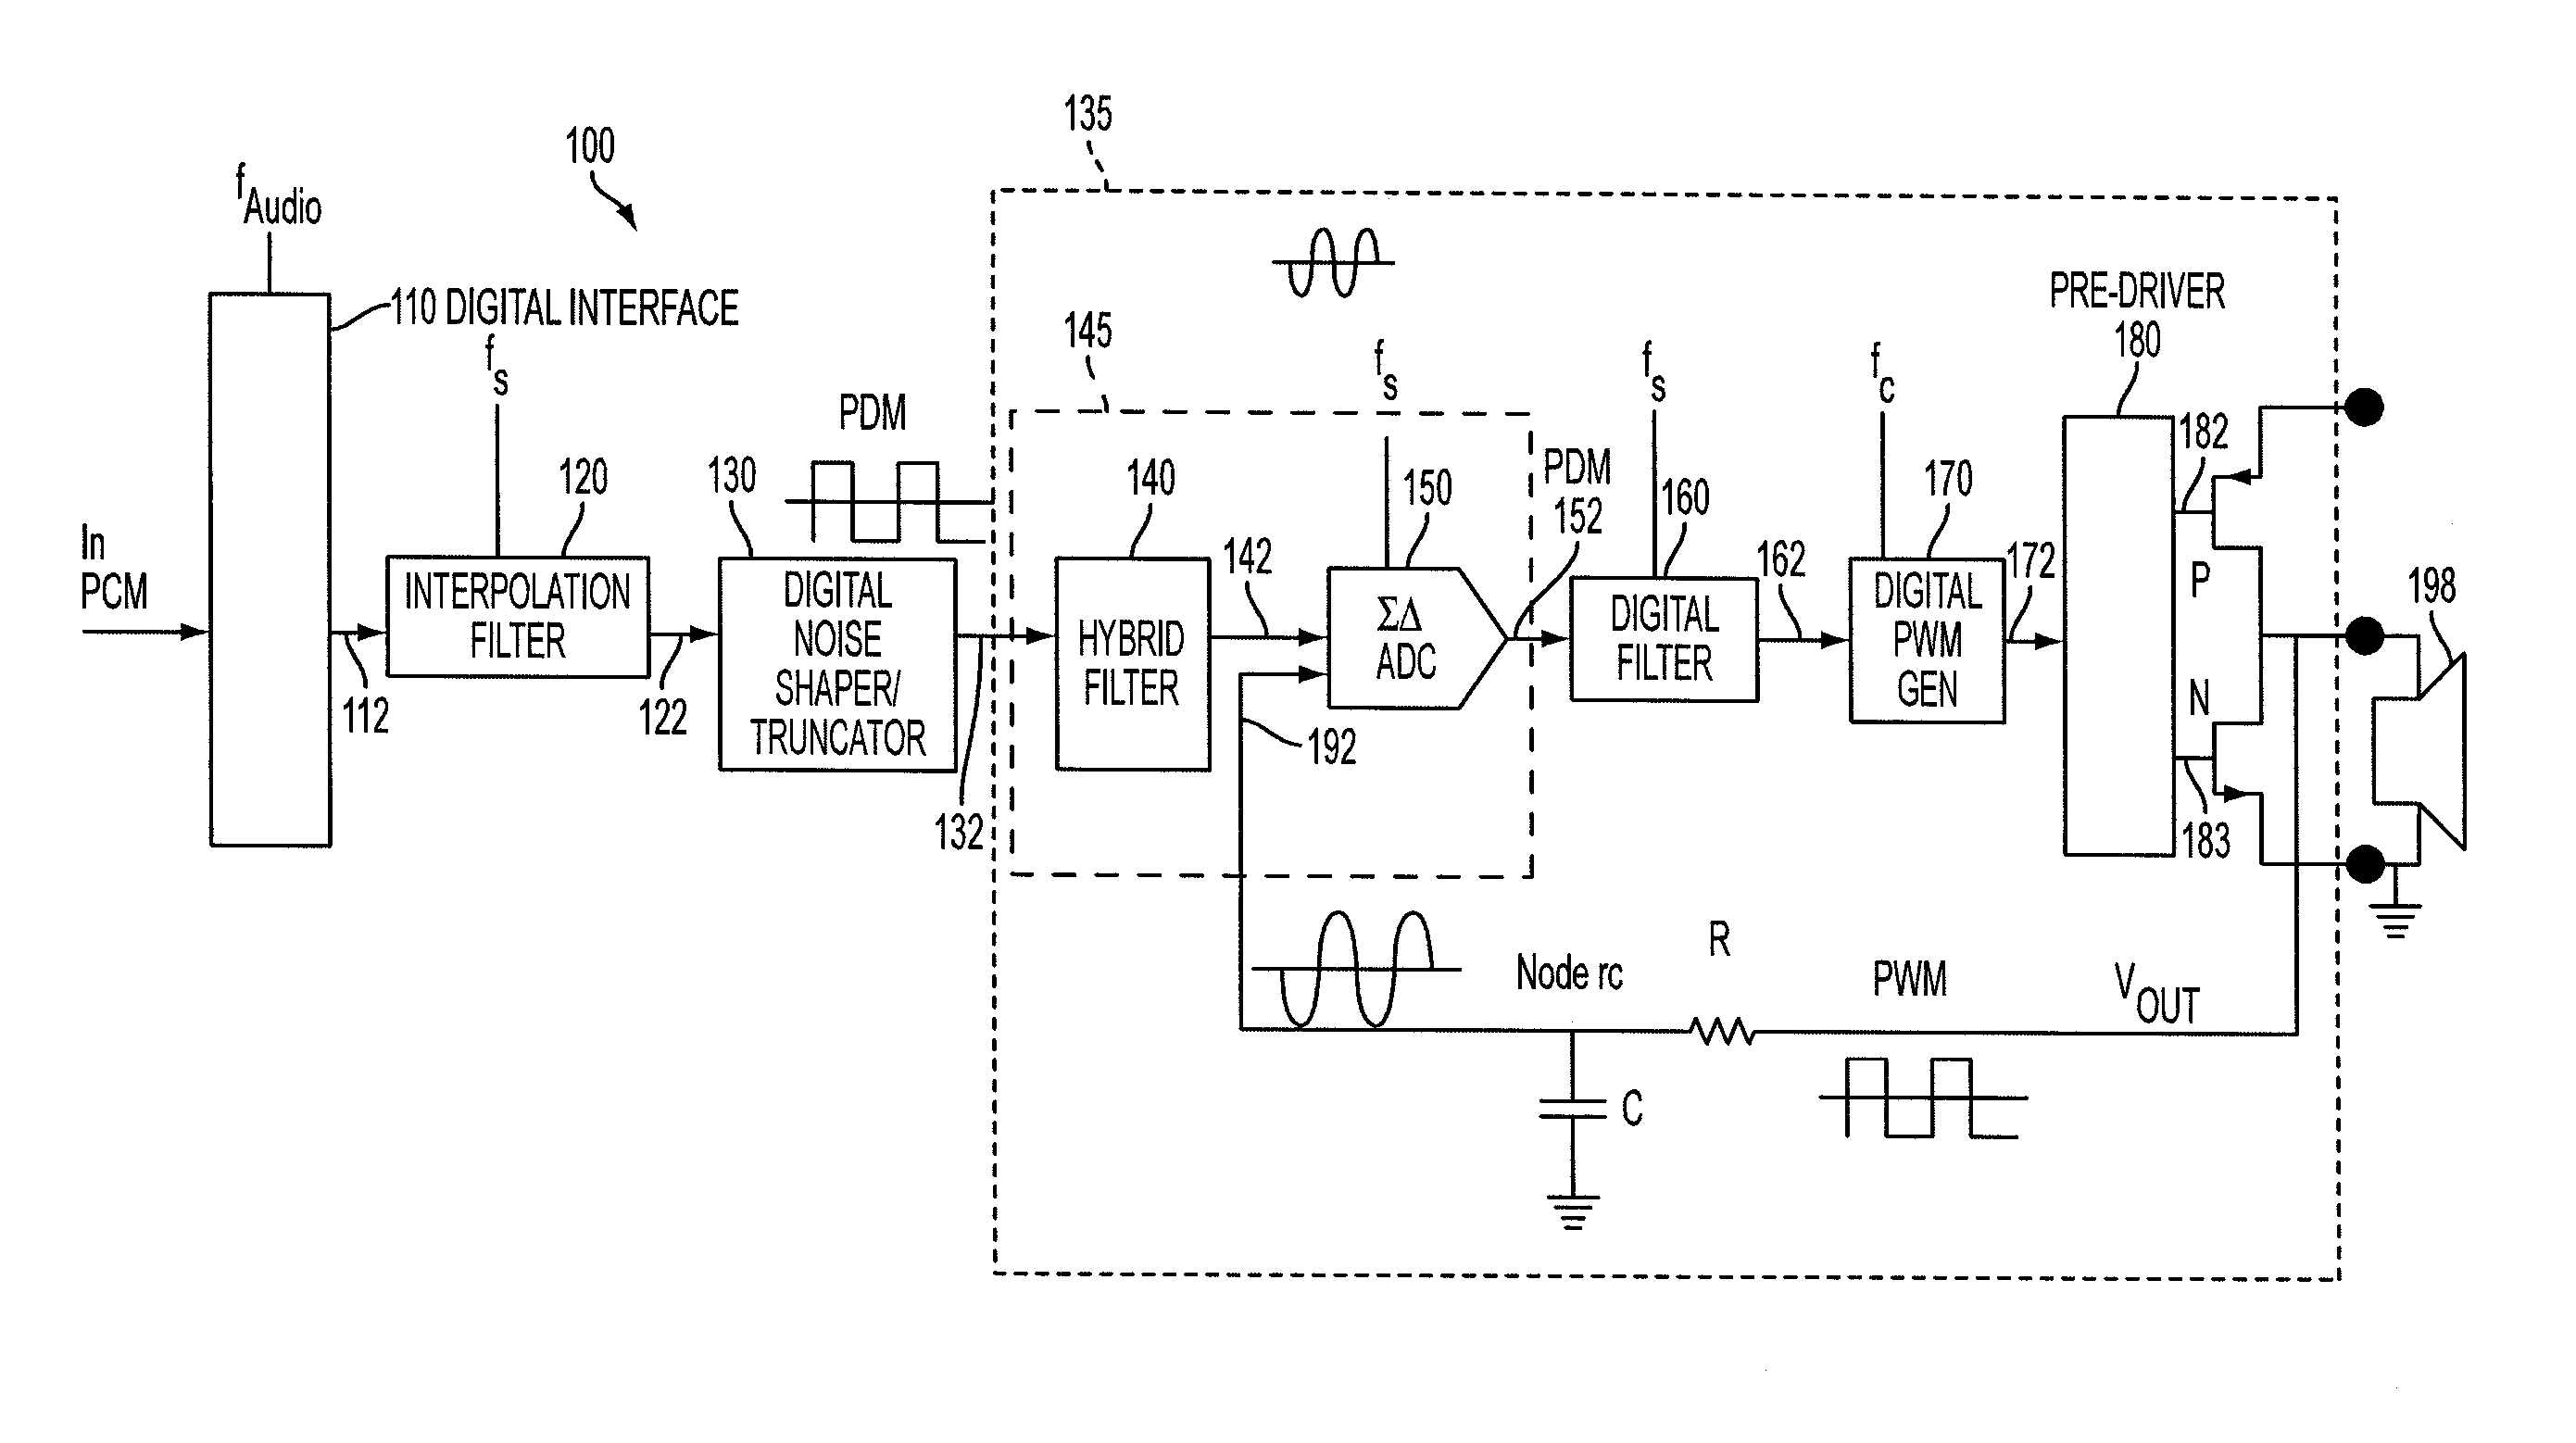 Amplifier with digital input and digital PWM control loop